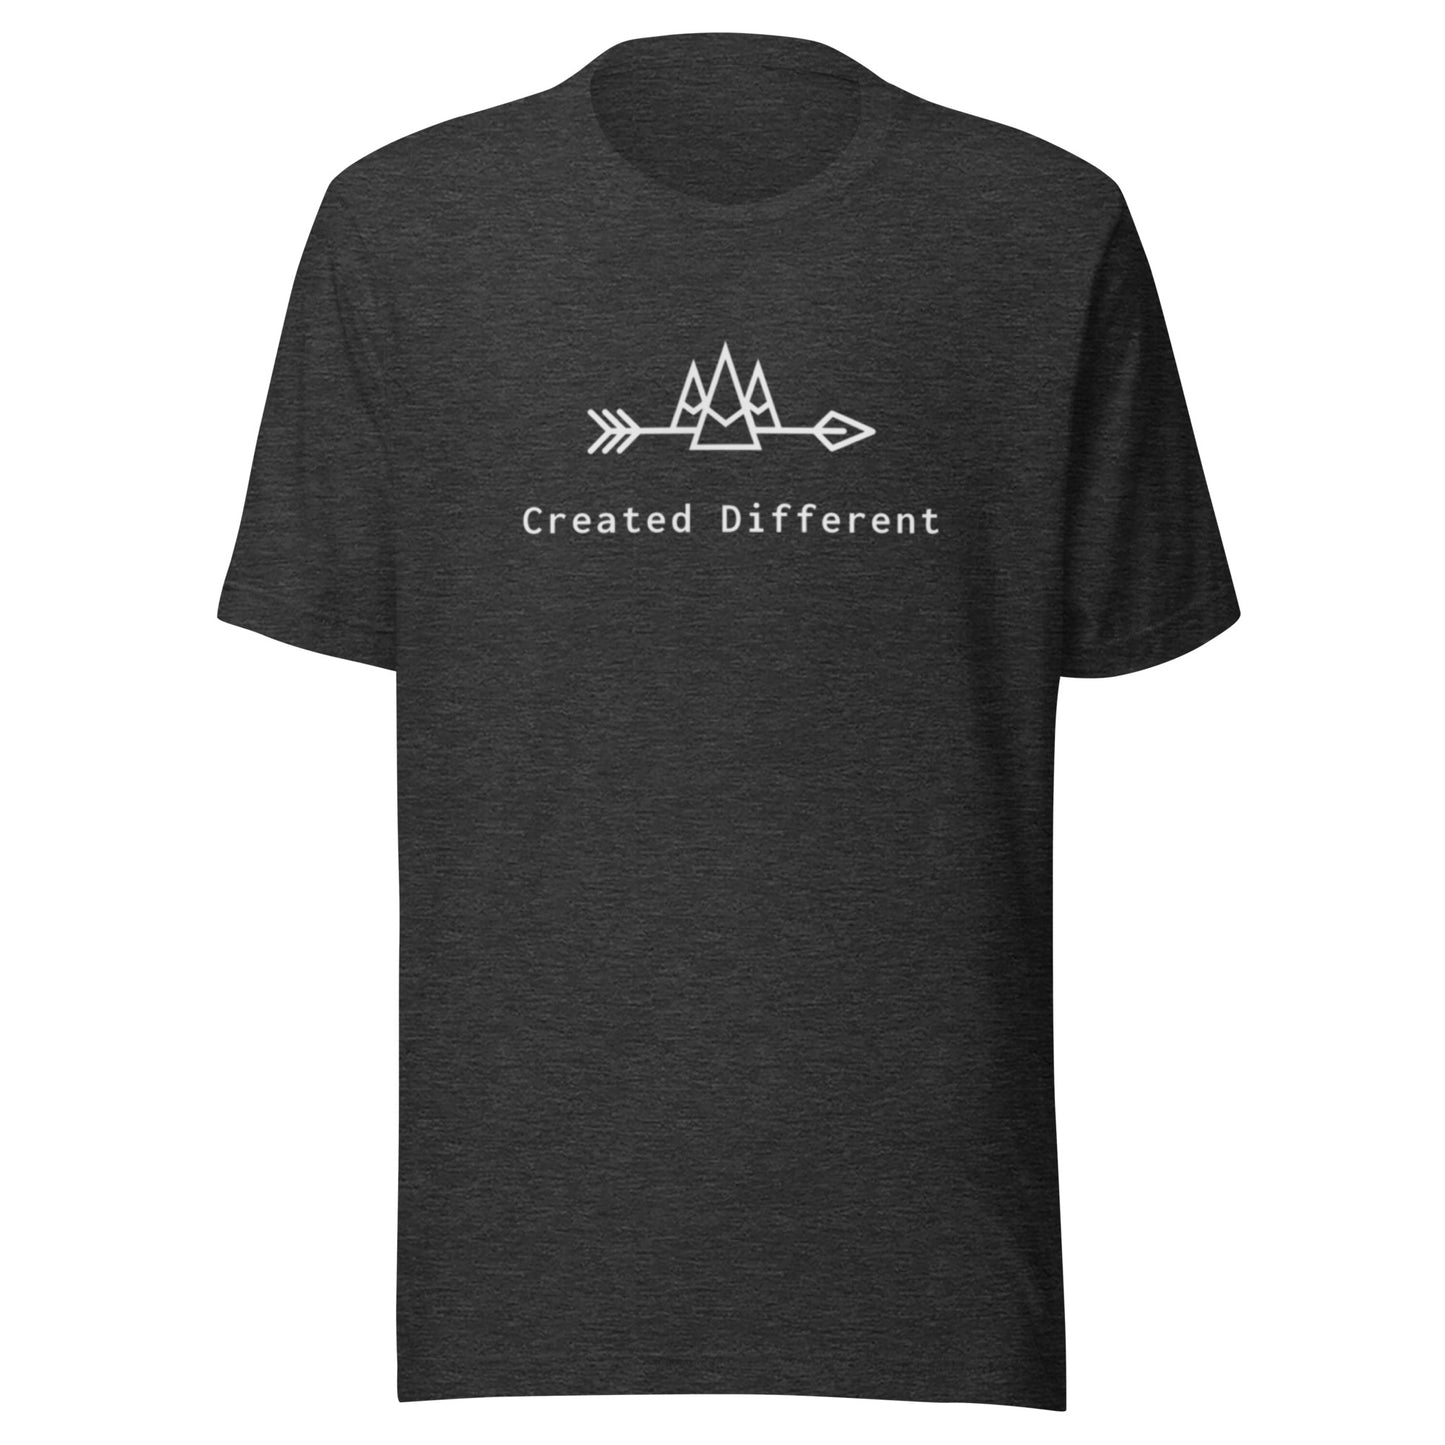 Created Different Unisex t-shirt